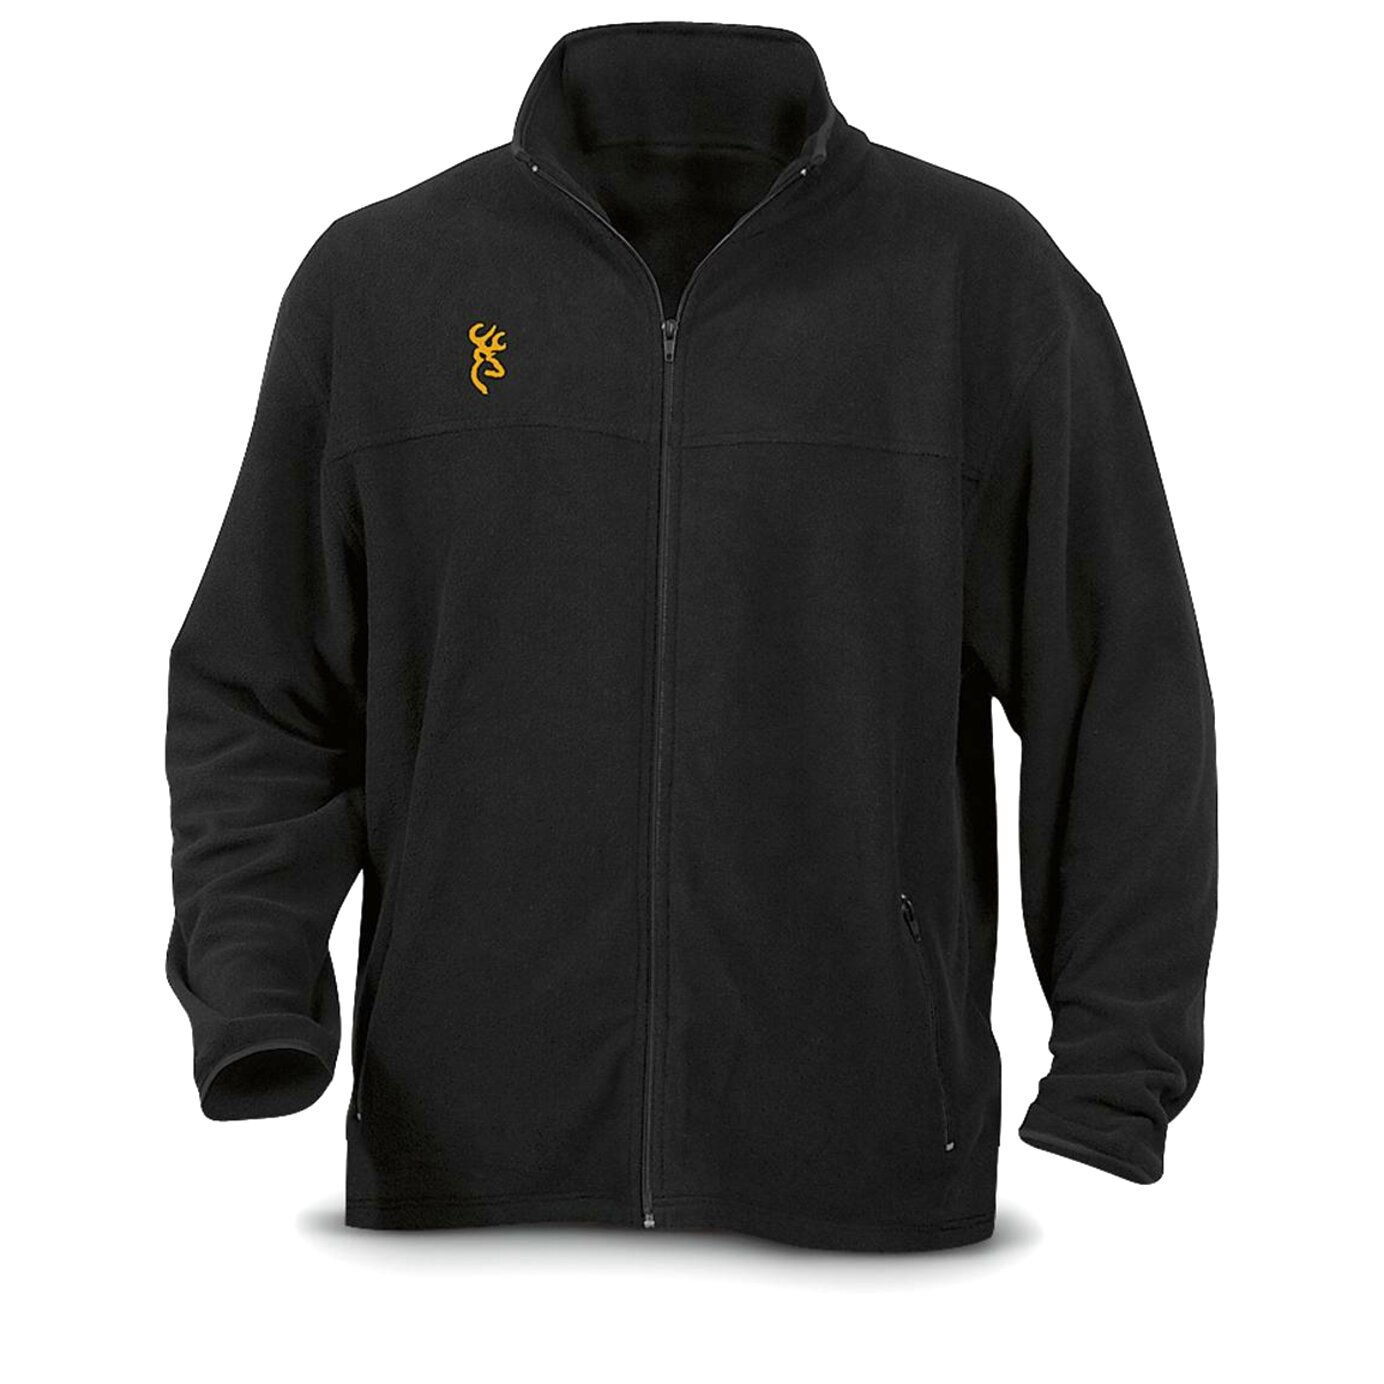 Browning Fleece for sale in UK | 76 used Browning Fleeces